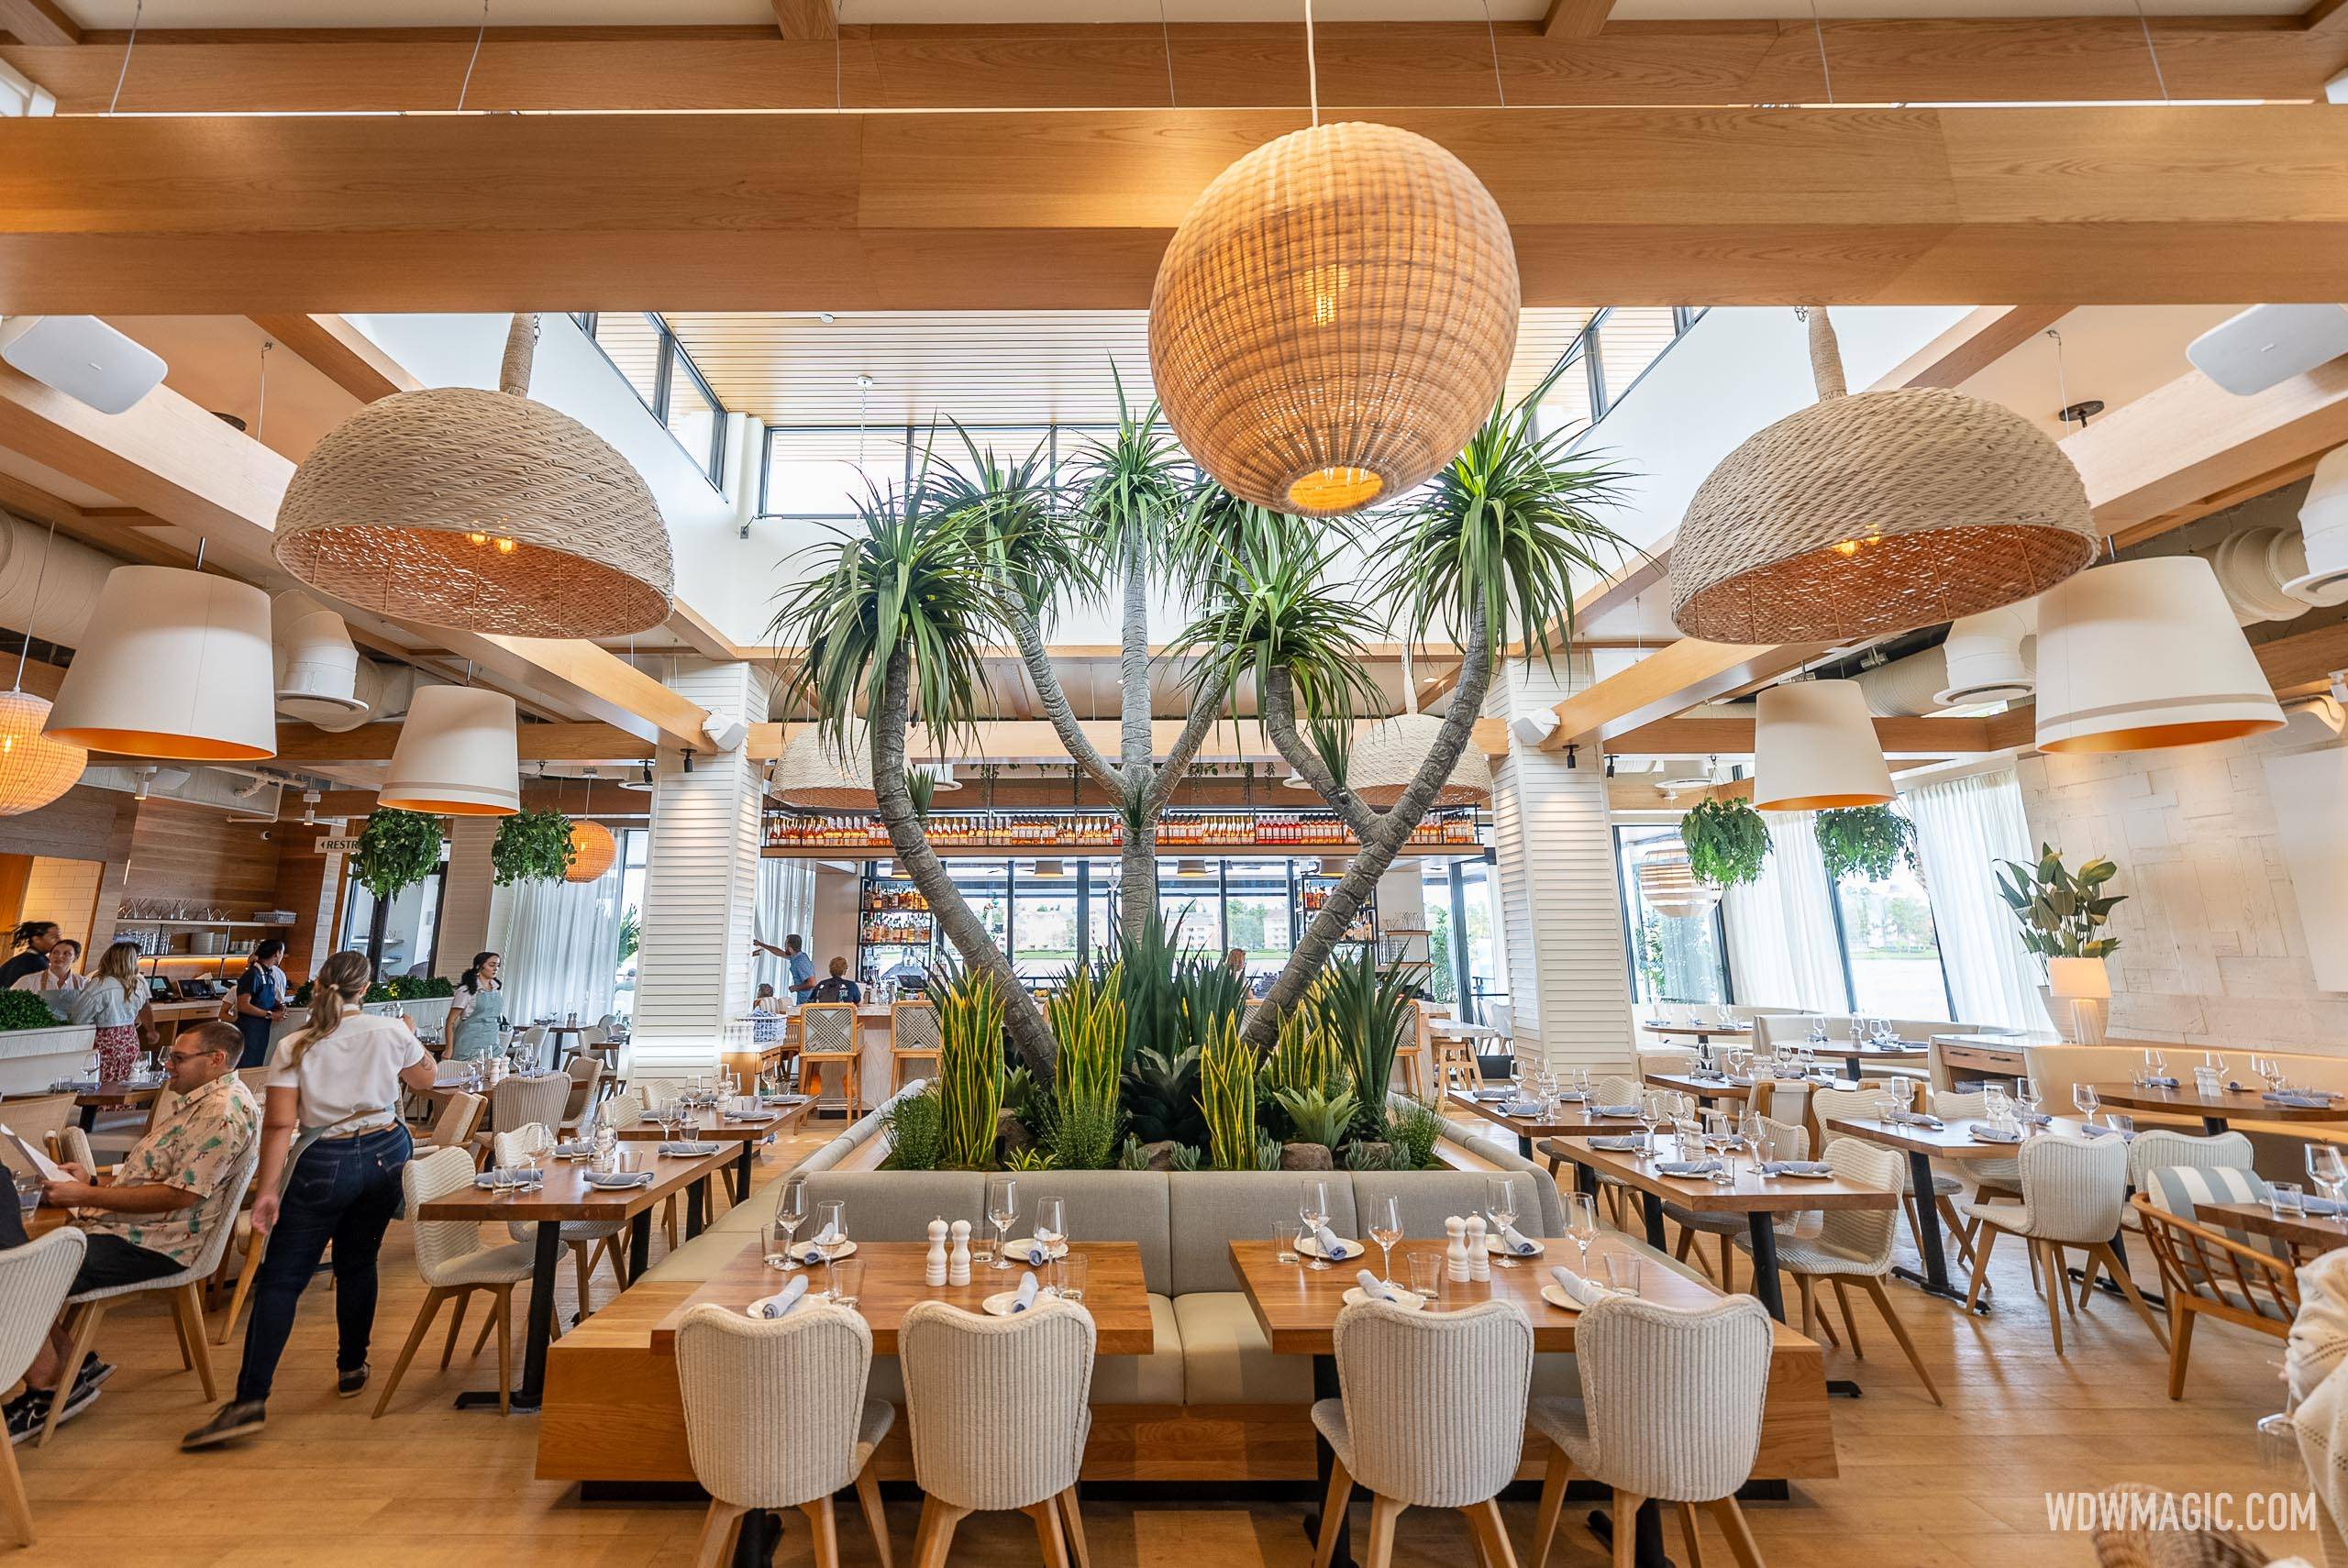 New Summer House on the Lake brings laid-back California dining to Disney Springs